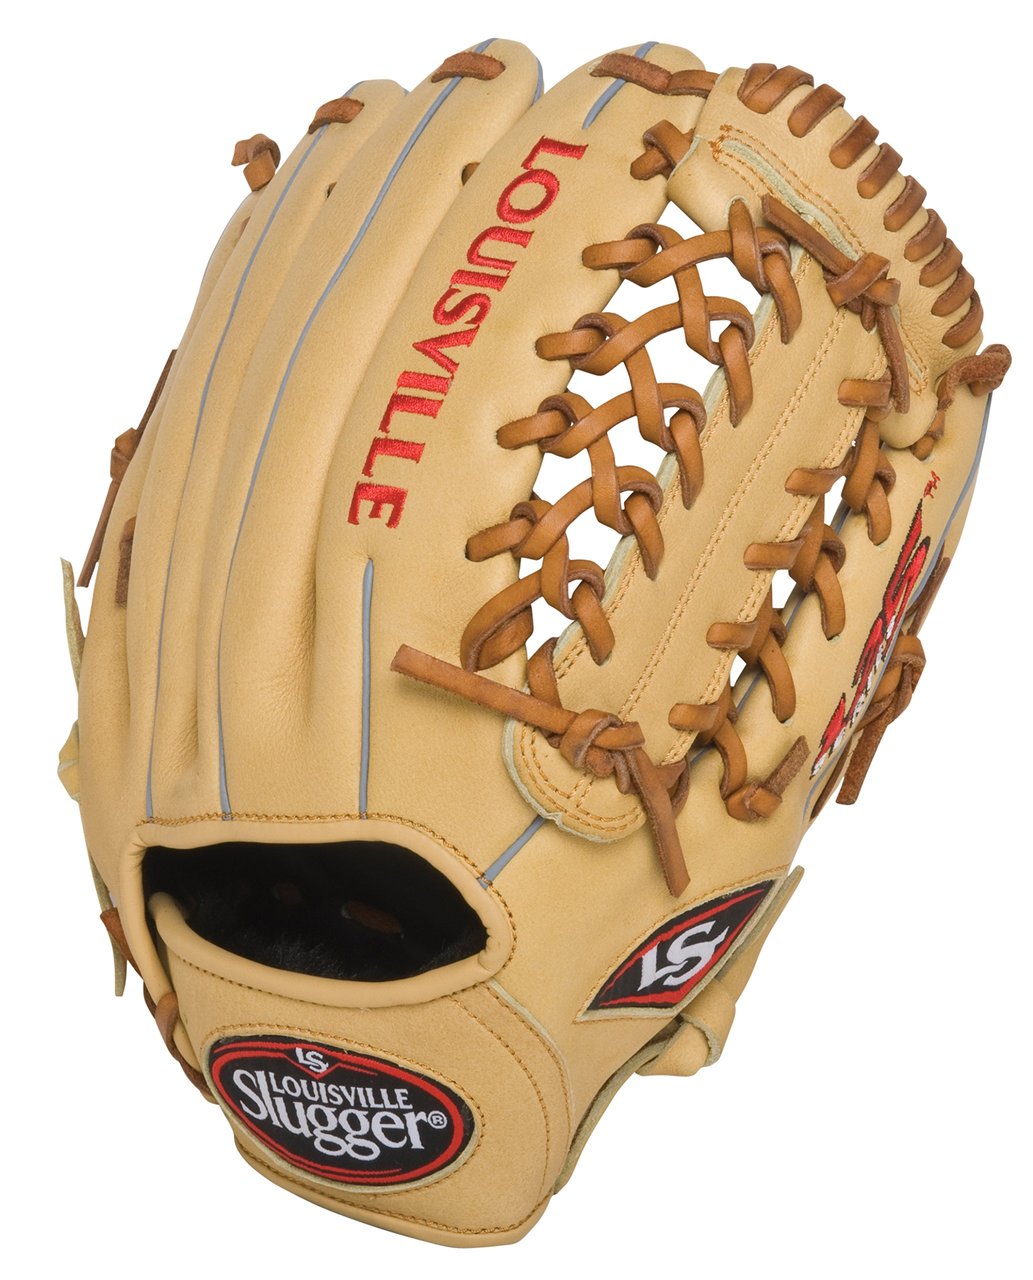 Louisville Slugger 125 Series Cream 11.5 inch Baseball Glove (Right Handed Throw) : Built for superior feel and an easier break-in period, the 125 Series is constructed with extra-tough dye-through lacing and genuine cowhide leather to provide unmatched strength and durability while wicking away perspiration with our Slugger Touch finger lining.